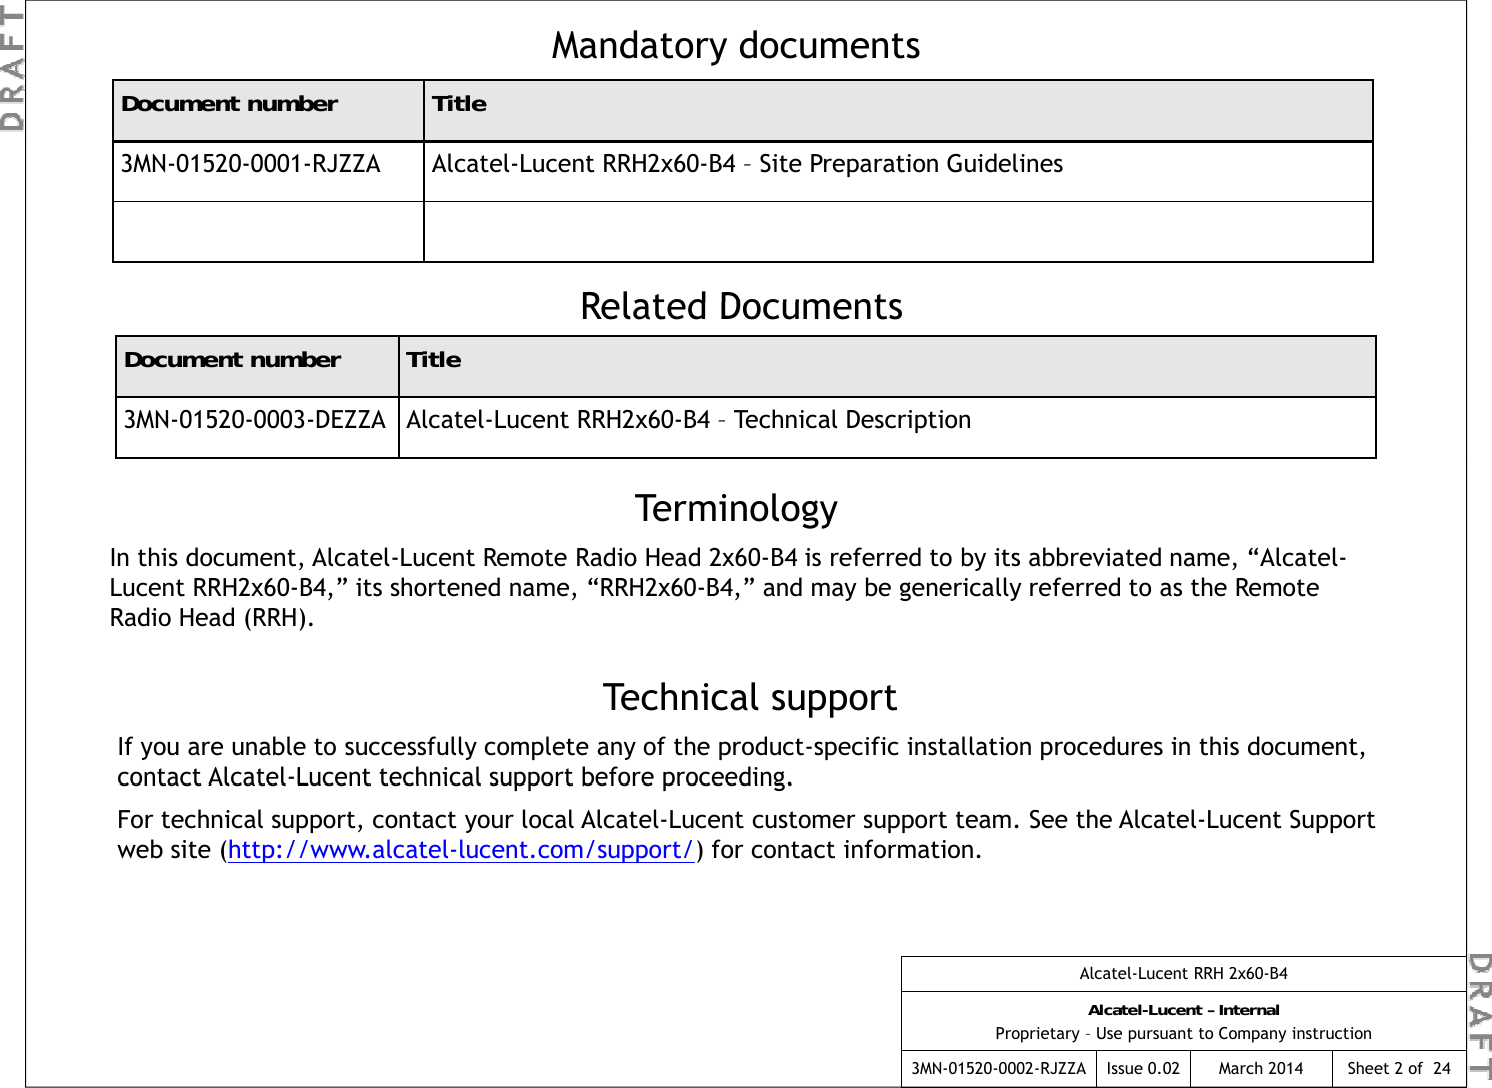 Document number TitleMandatory documentsRelated Documents3MN-01520-0001-RJZZA Alcatel-Lucent RRH2x60-B4 – Site Preparation GuidelinesDocument number Title3MN-01520-0003-DEZZA Alcatel-Lucent RRH2x60-B4 – Technical DescriptionRelated DocumentsTerminologyIn this document, Alcatel-Lucent Remote Radio Head 2x60-B4 is referred to by its abbreviated name, “Alcatel-Lucent RRH2x60-B4,” its shortened name, “RRH2x60-B4,” and may be generically referred to as the Remote Radio Head (RRH).Radio Head (RRH).Technical supportIf you are unable to successfully complete any of the product-specific installation procedures in this document, contact Alcatel-Lucent technical support before proceeding.contact AlcatelLucent technical support before proceeding.For technical support, contact your local Alcatel-Lucent customer support team. See the Alcatel-Lucent Support web site (http://www.alcatel-lucent.com/support/) for contact information.Alcatel-Lucent RRH 2x60-B4Alcatel-Lucent – InternalProprietary – Use pursuant to Company instruction3MN-01520-0002-RJZZA Issue 0.02 March 2014 Sheet 2 of  24